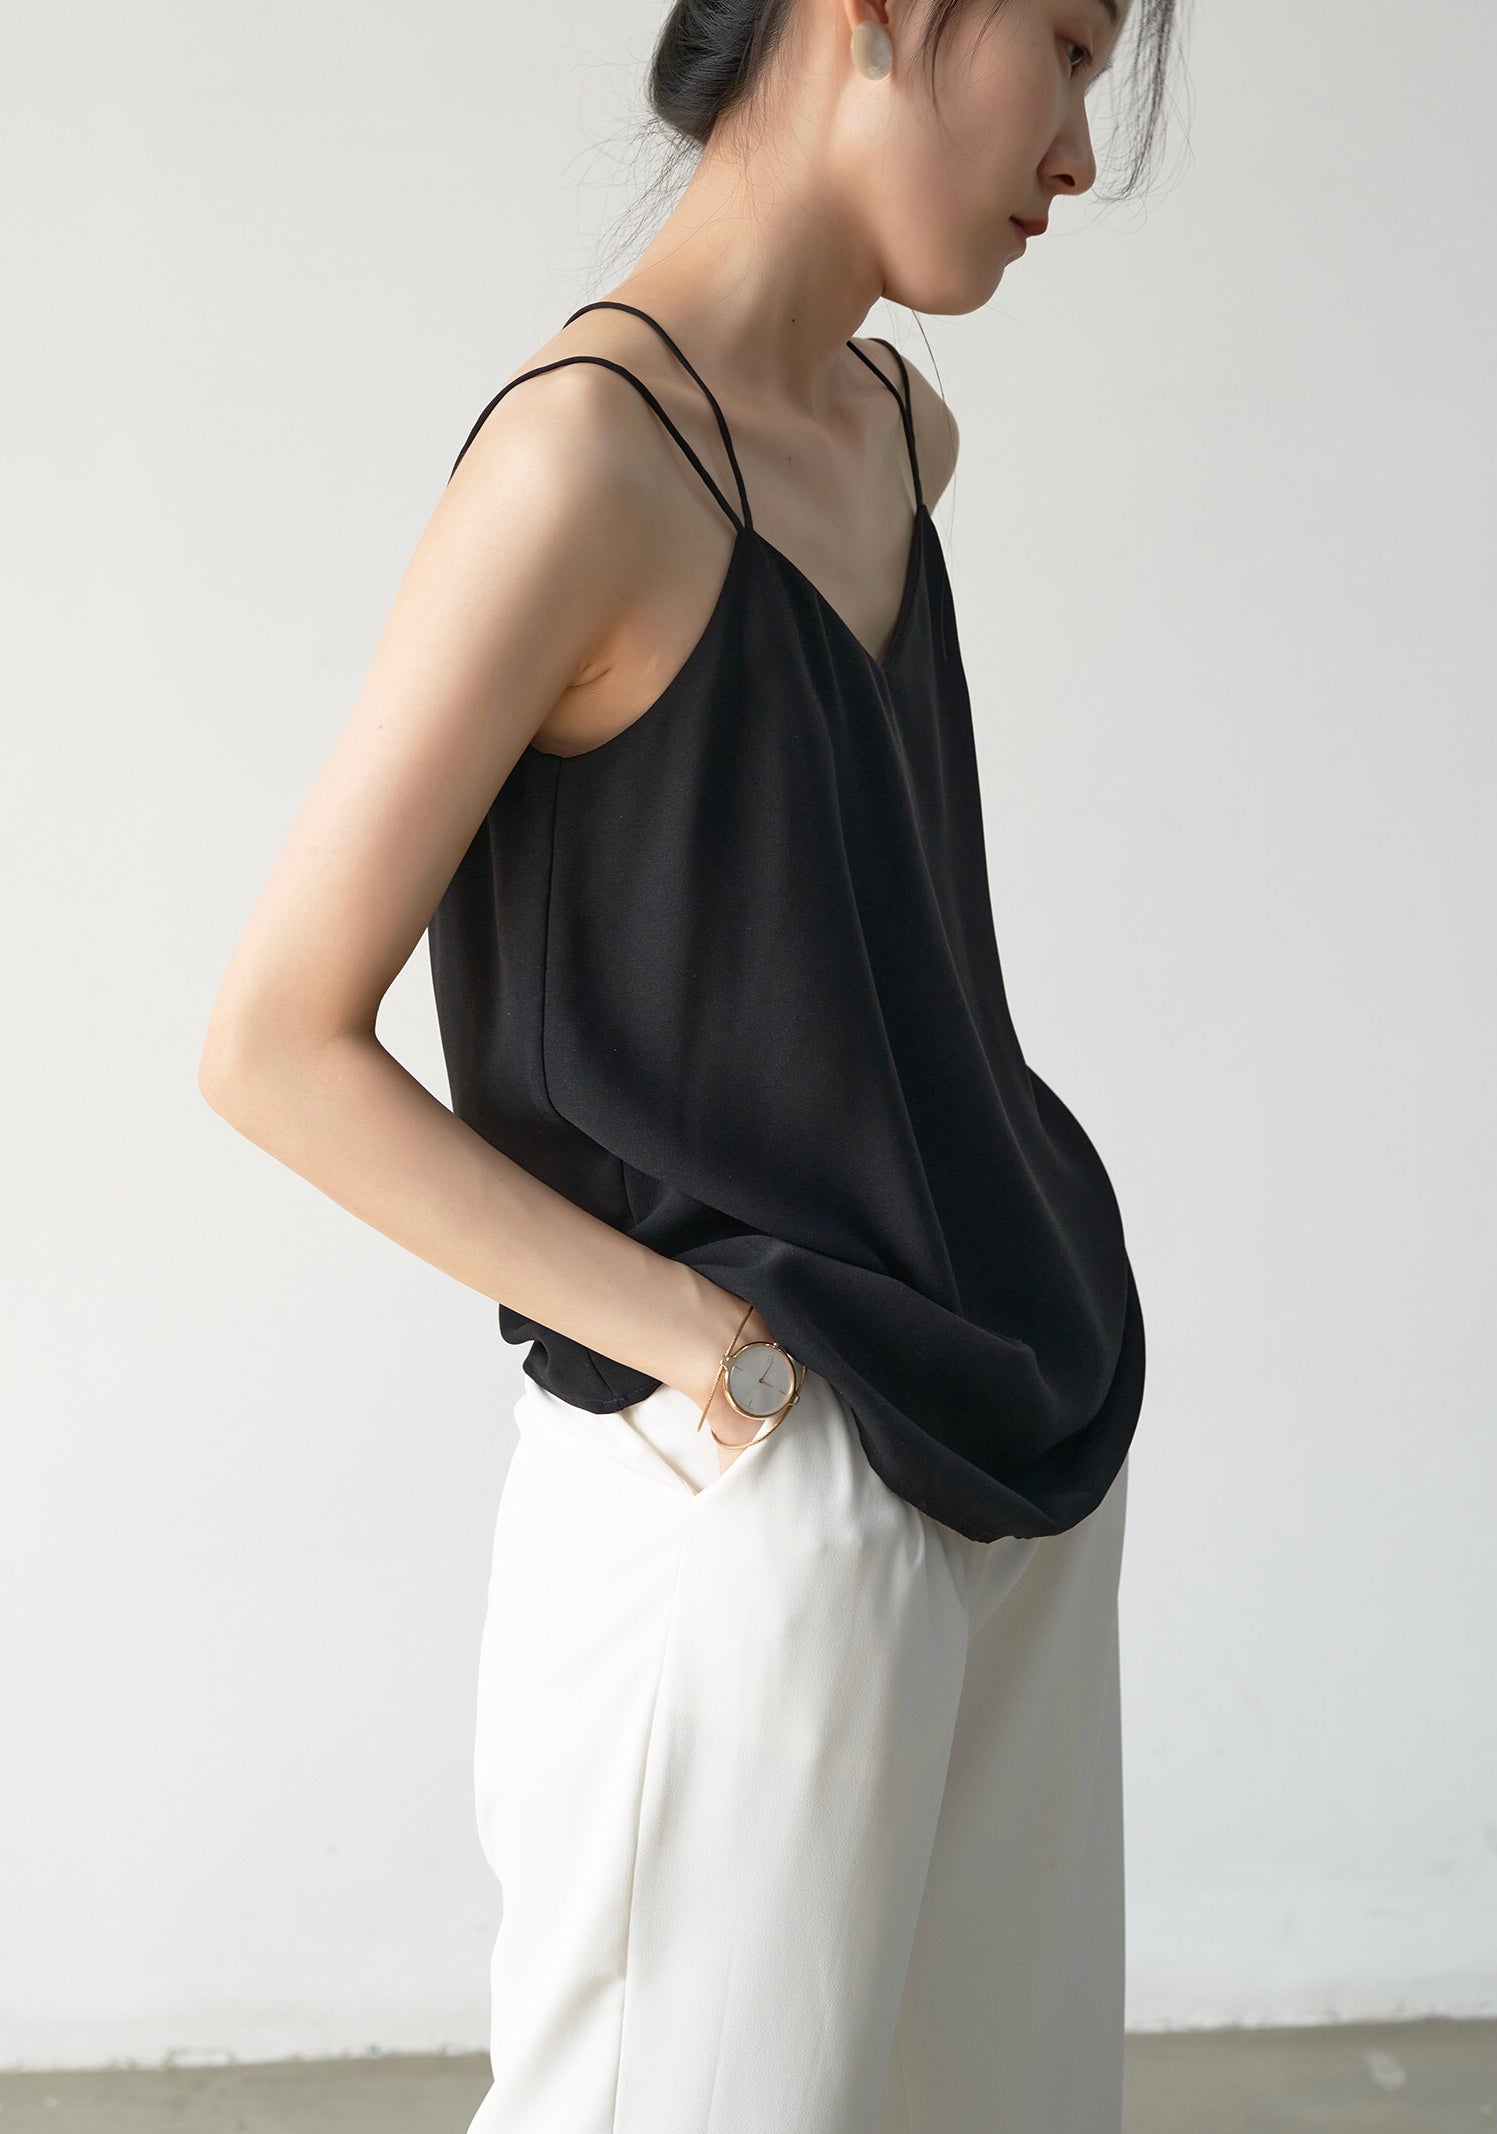 Double Strap Cross Back Camisole in Black